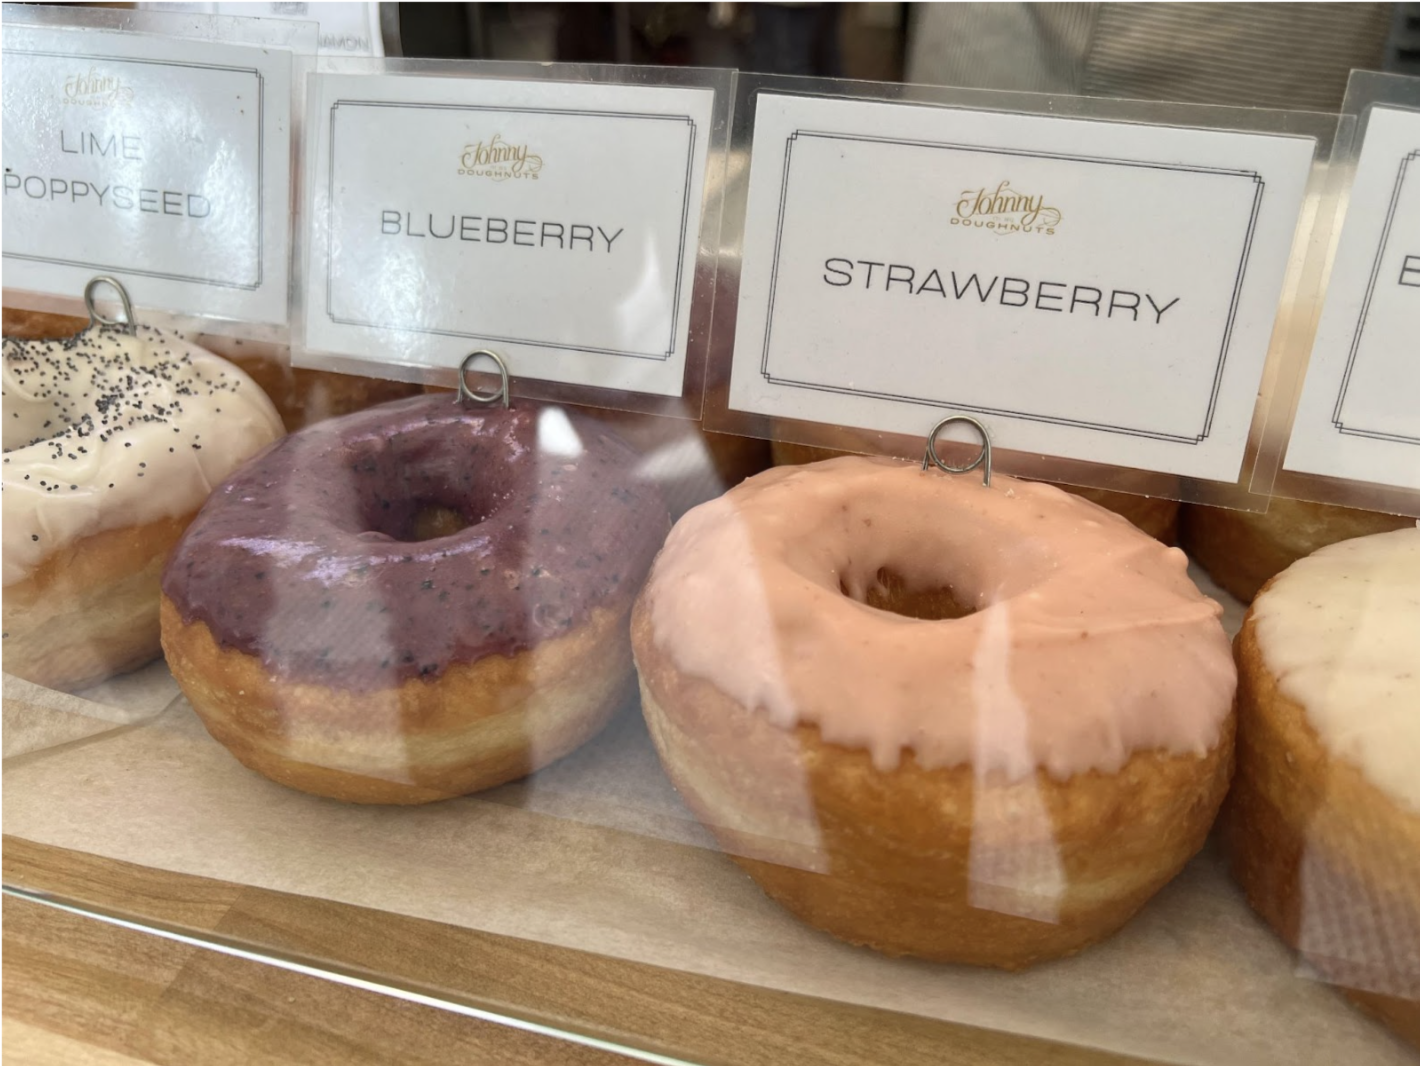 Given <b>img</b>. Q: What flavor is the pink doughnut on the right? A:[sep] strawberry.. Q: What flavor is the doughnut on the left? A blueberry. 